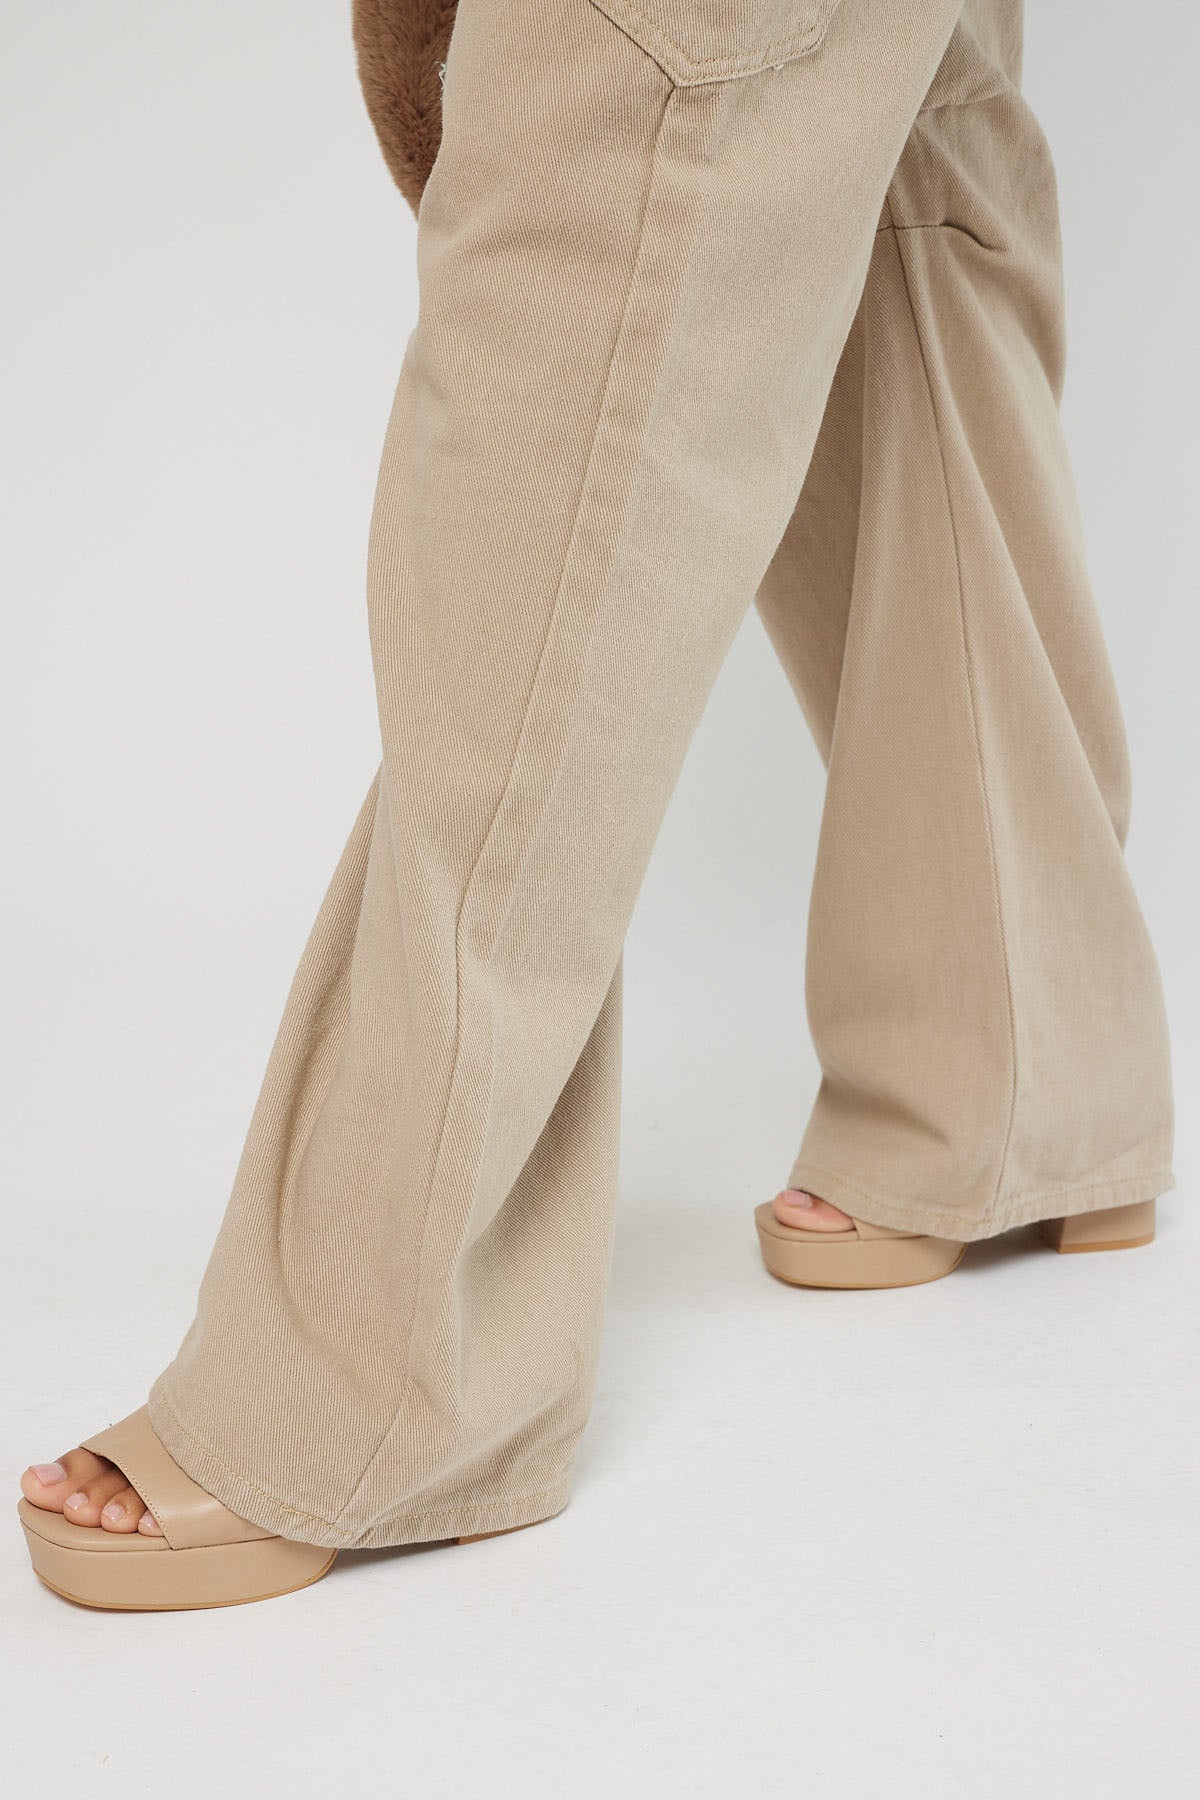 Lioness Miami Vice Pant Beige – Universal Store